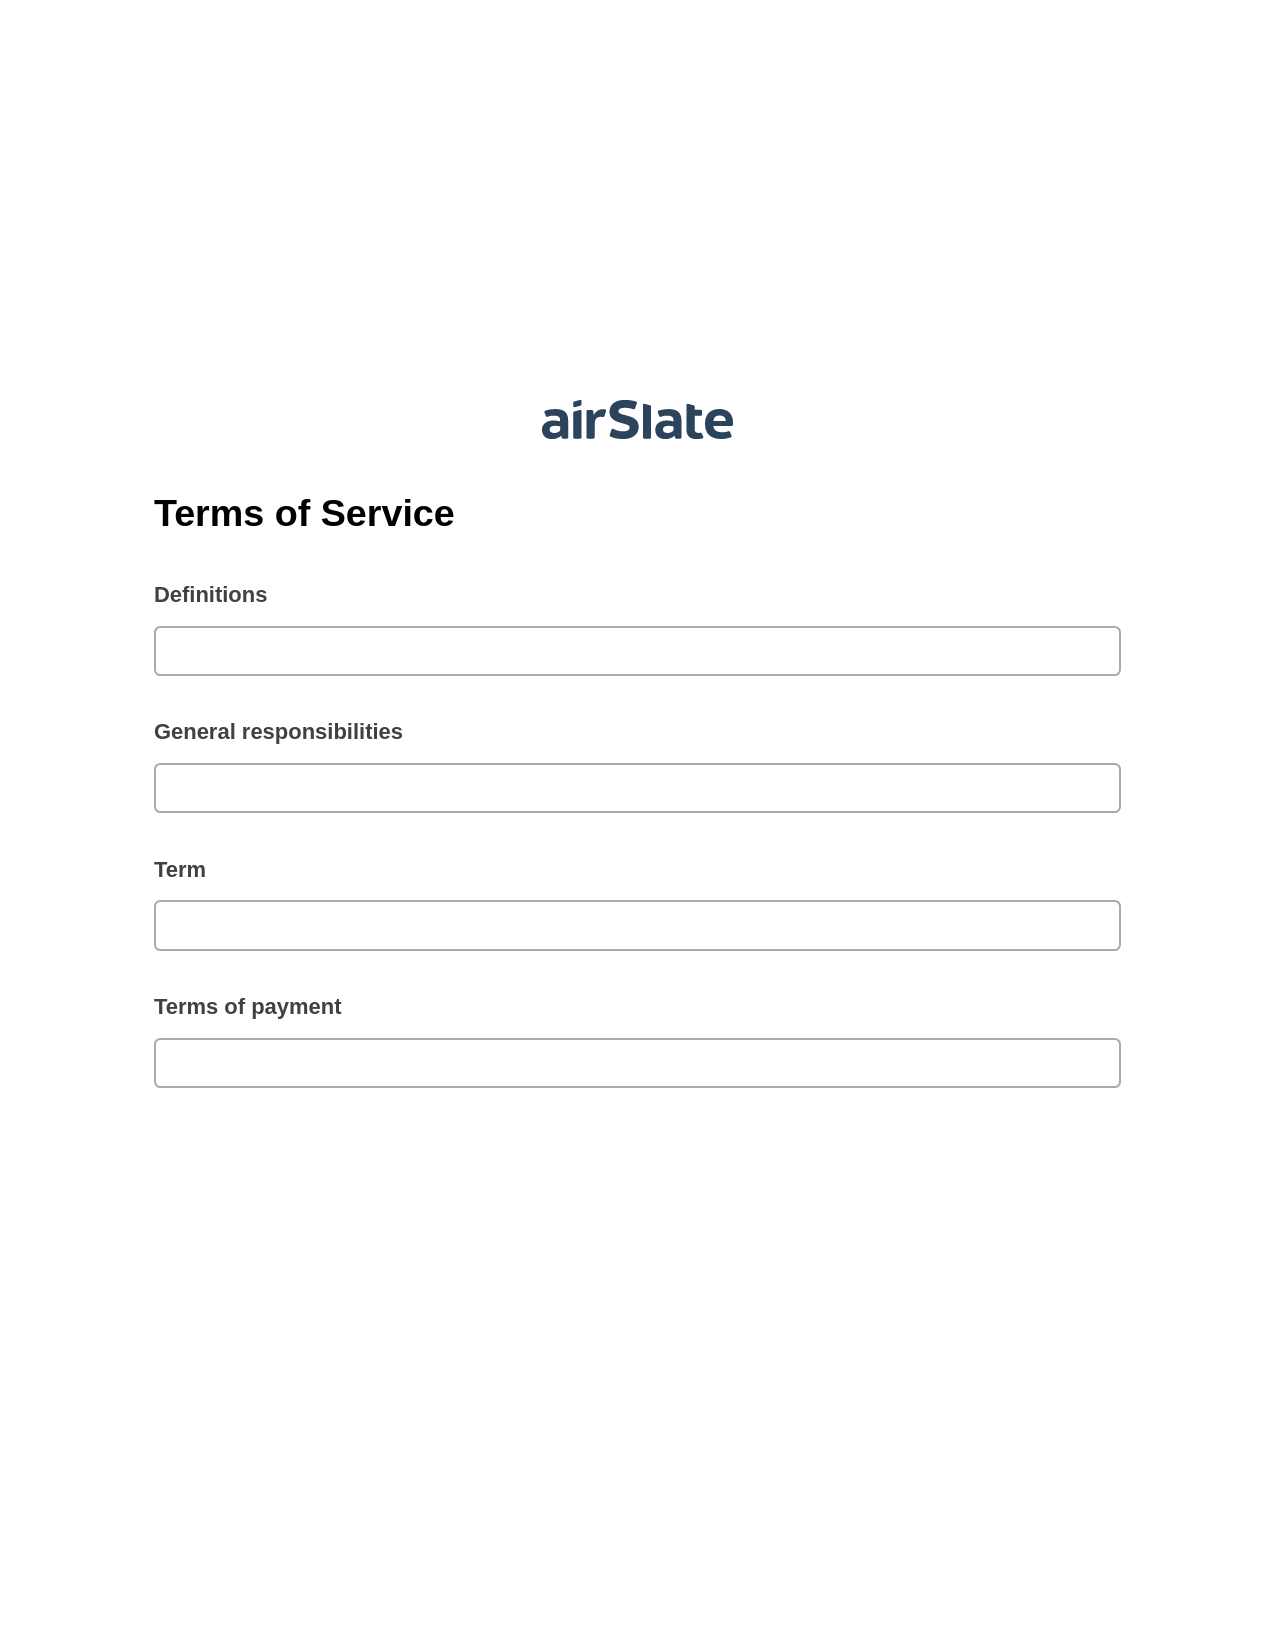 Multirole Terms of Service Pre-fill from MySQL Bot, Remove Tags From Slate Bot, Archive to SharePoint Folder Bot